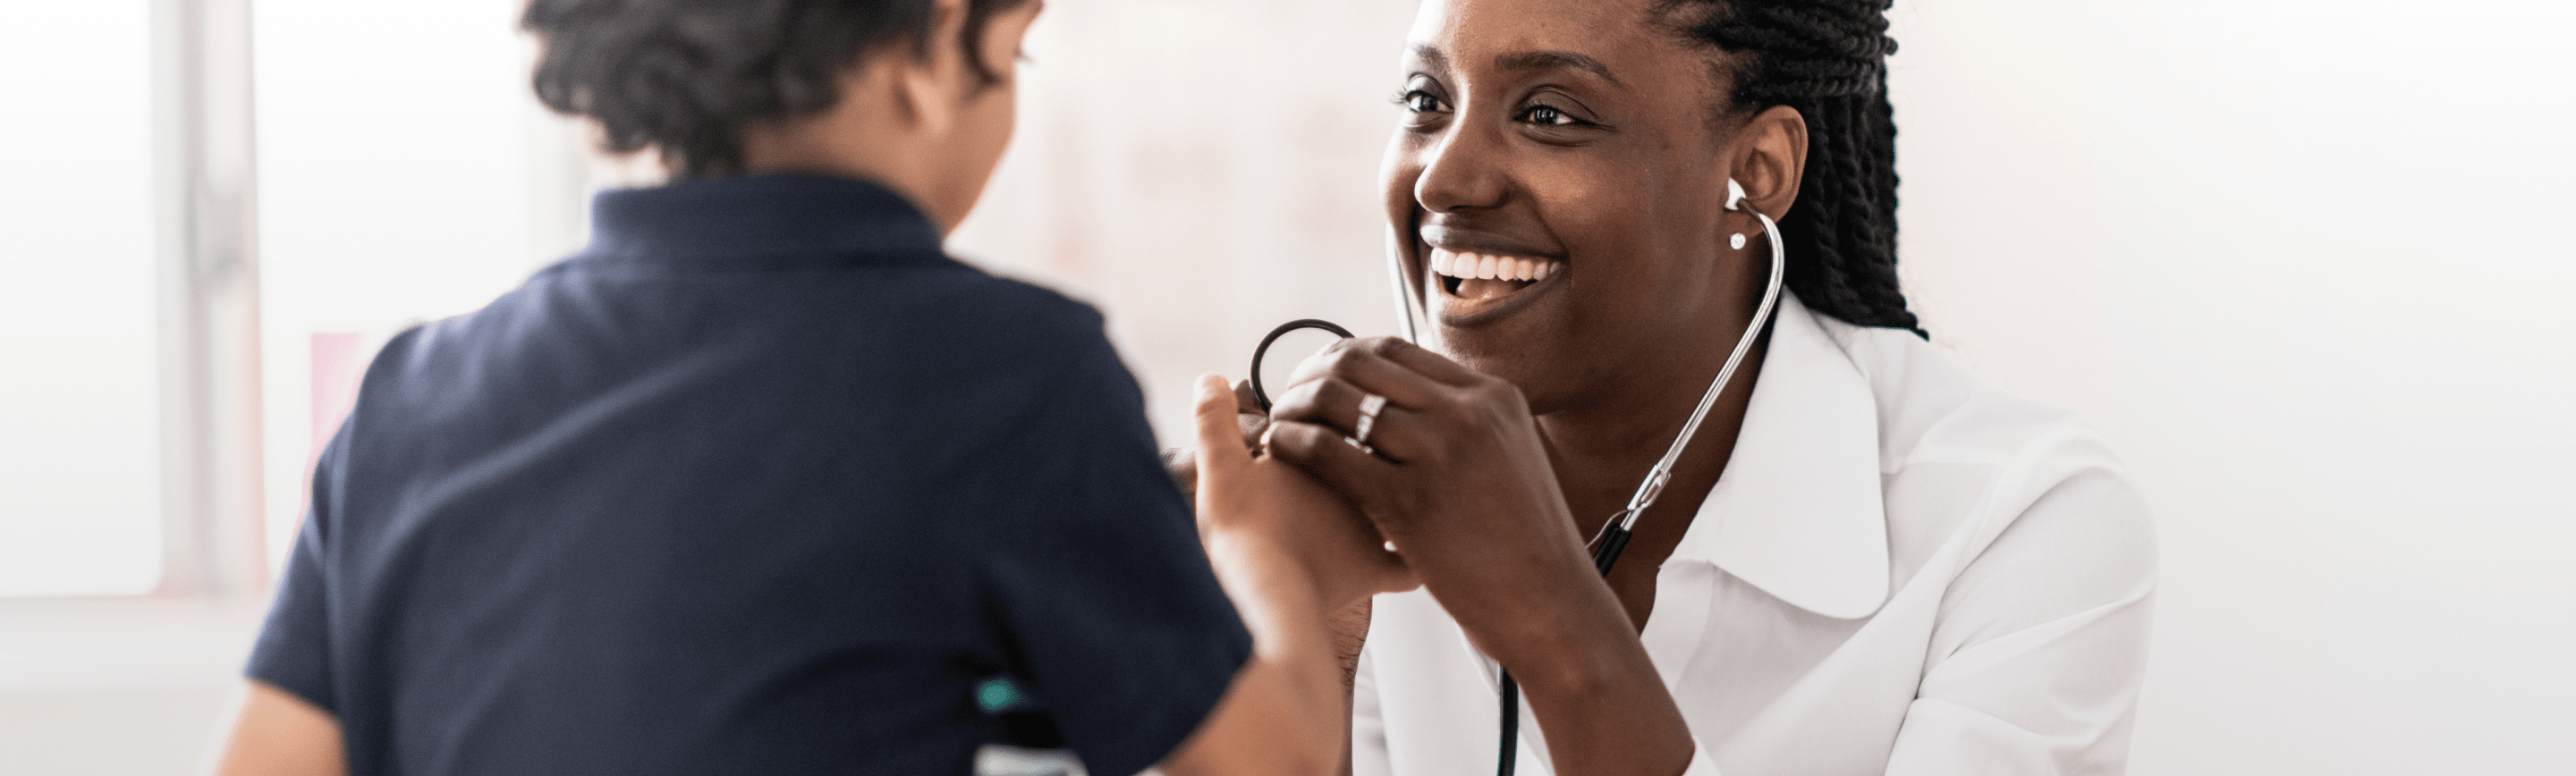 Female doctor smiling at a child as she checks their blood pressure.